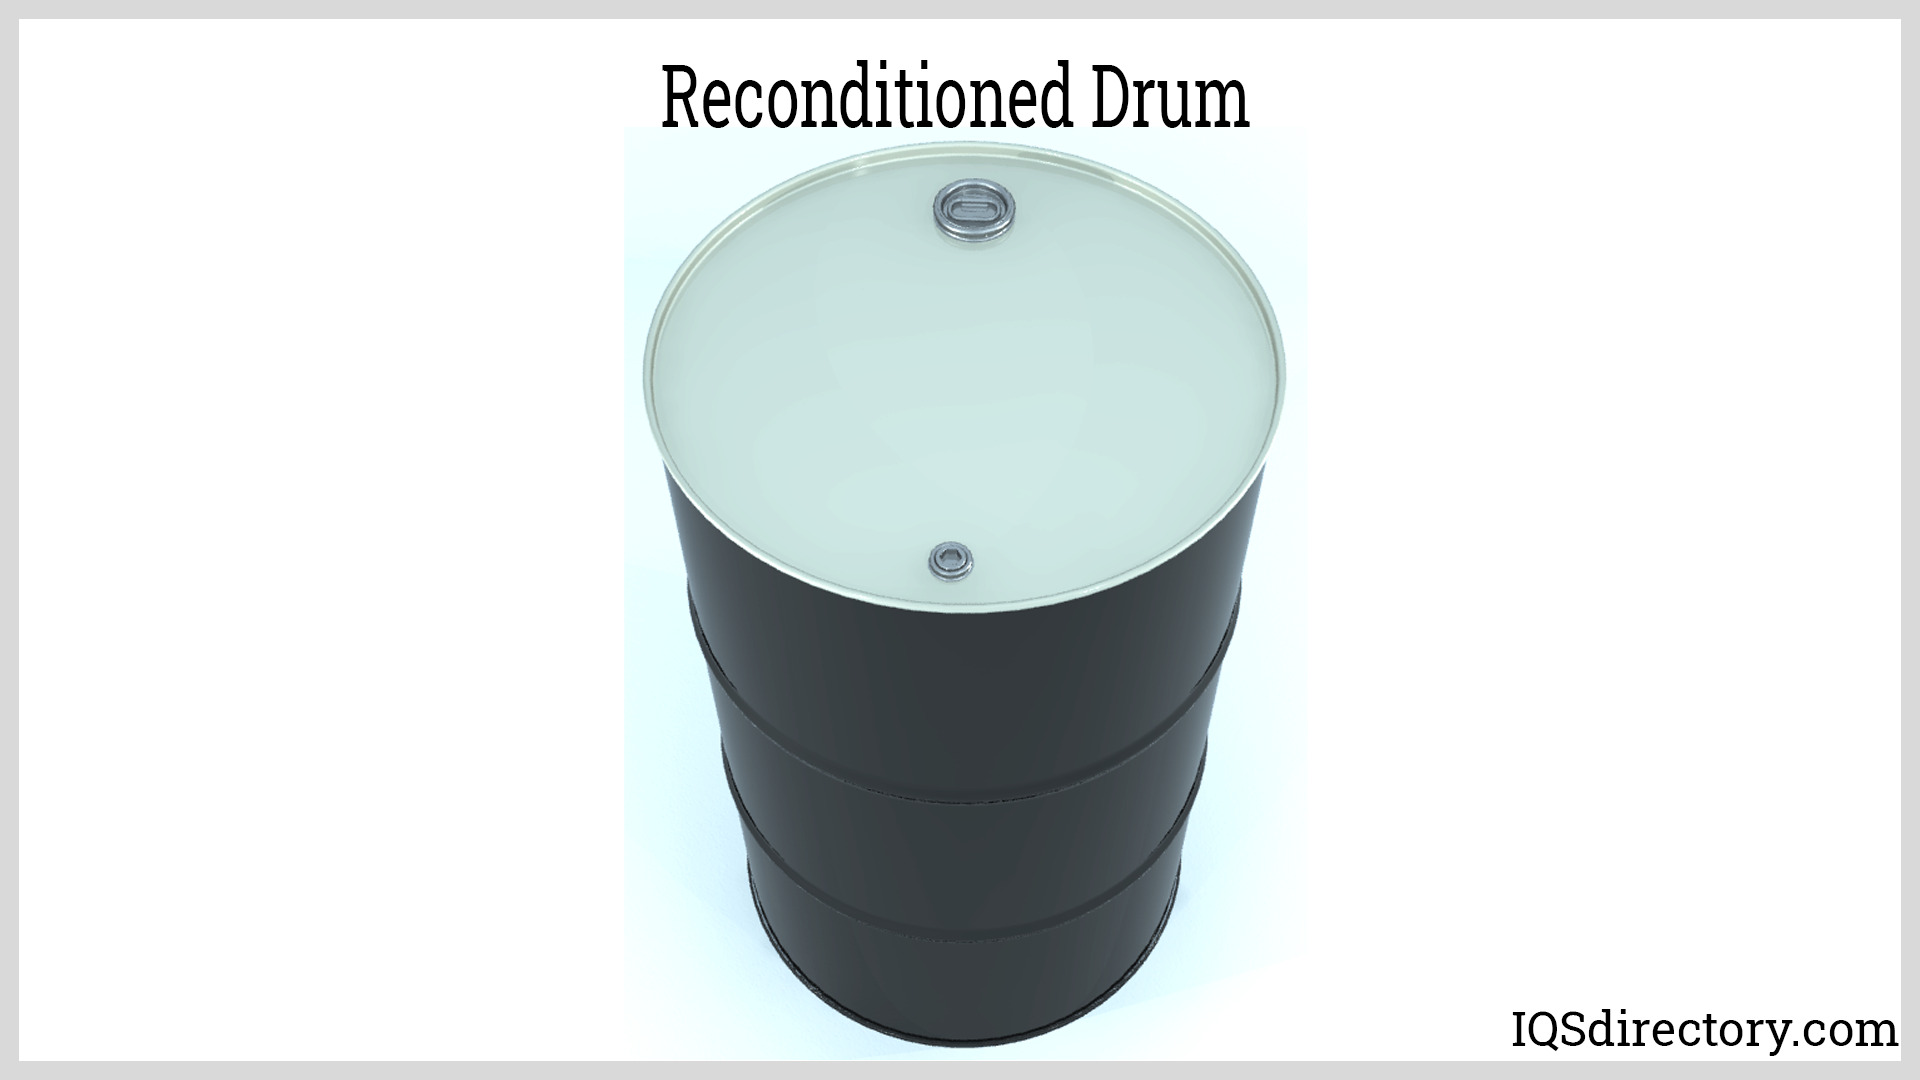 Reconditioned Drums